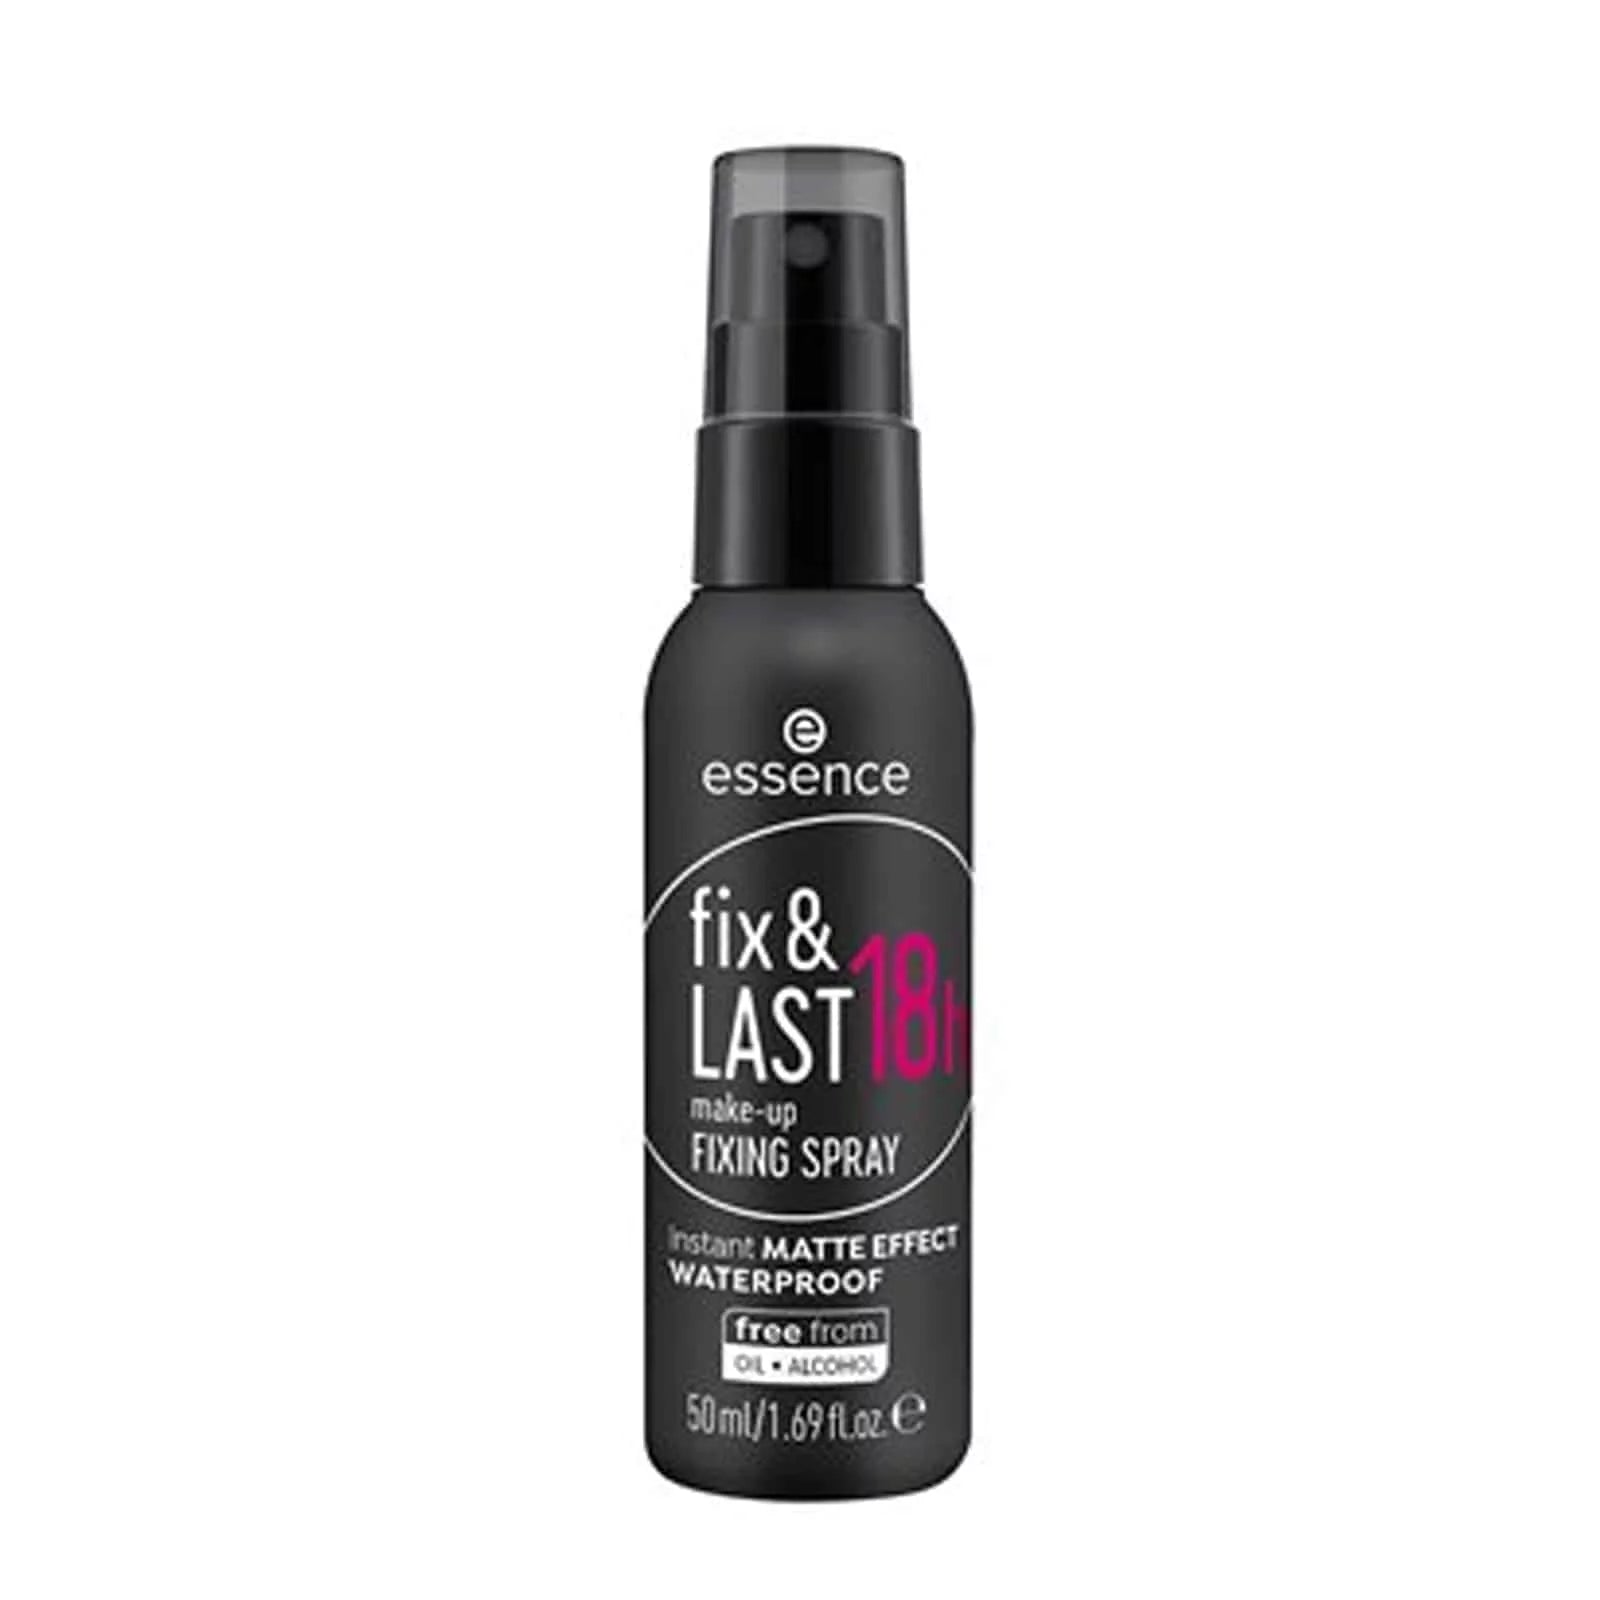 Essence Fix And Last 18h Makeup Fixing Spray - 50ml